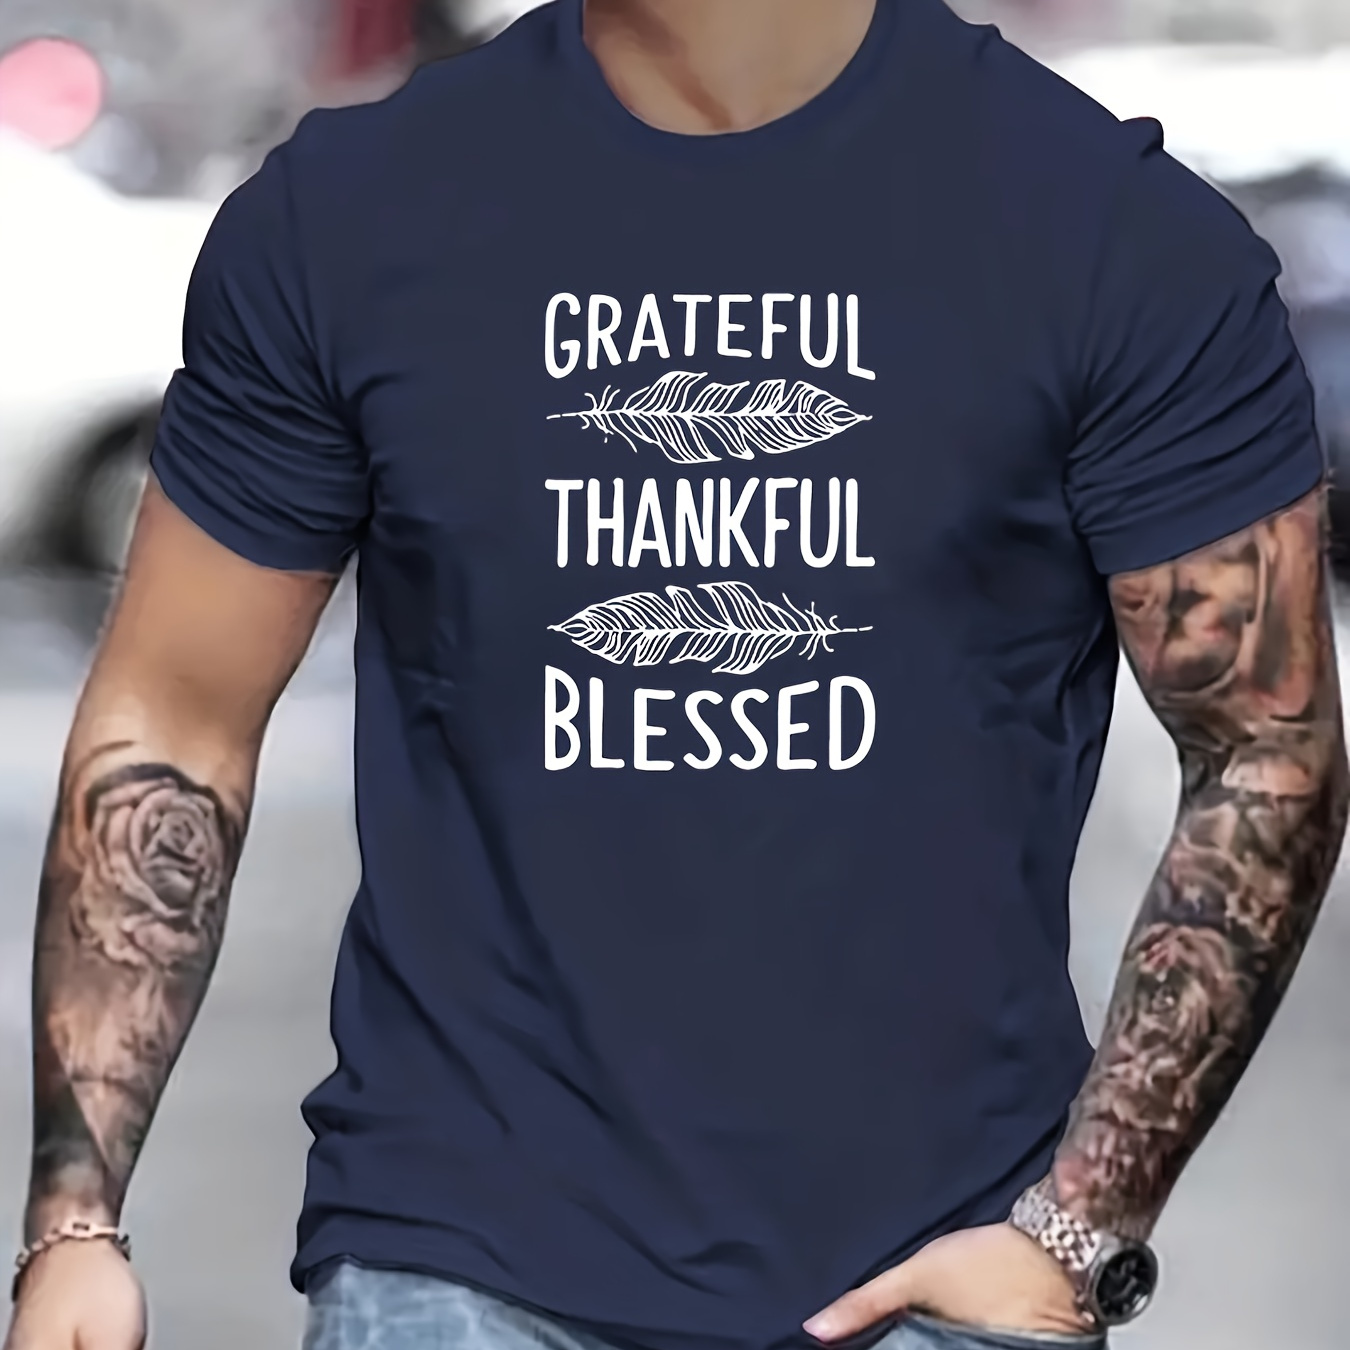 

Grateful Thankful Blessed Print T Shirt, Tees For Men, Casual Short Sleeve T-shirt For Summer